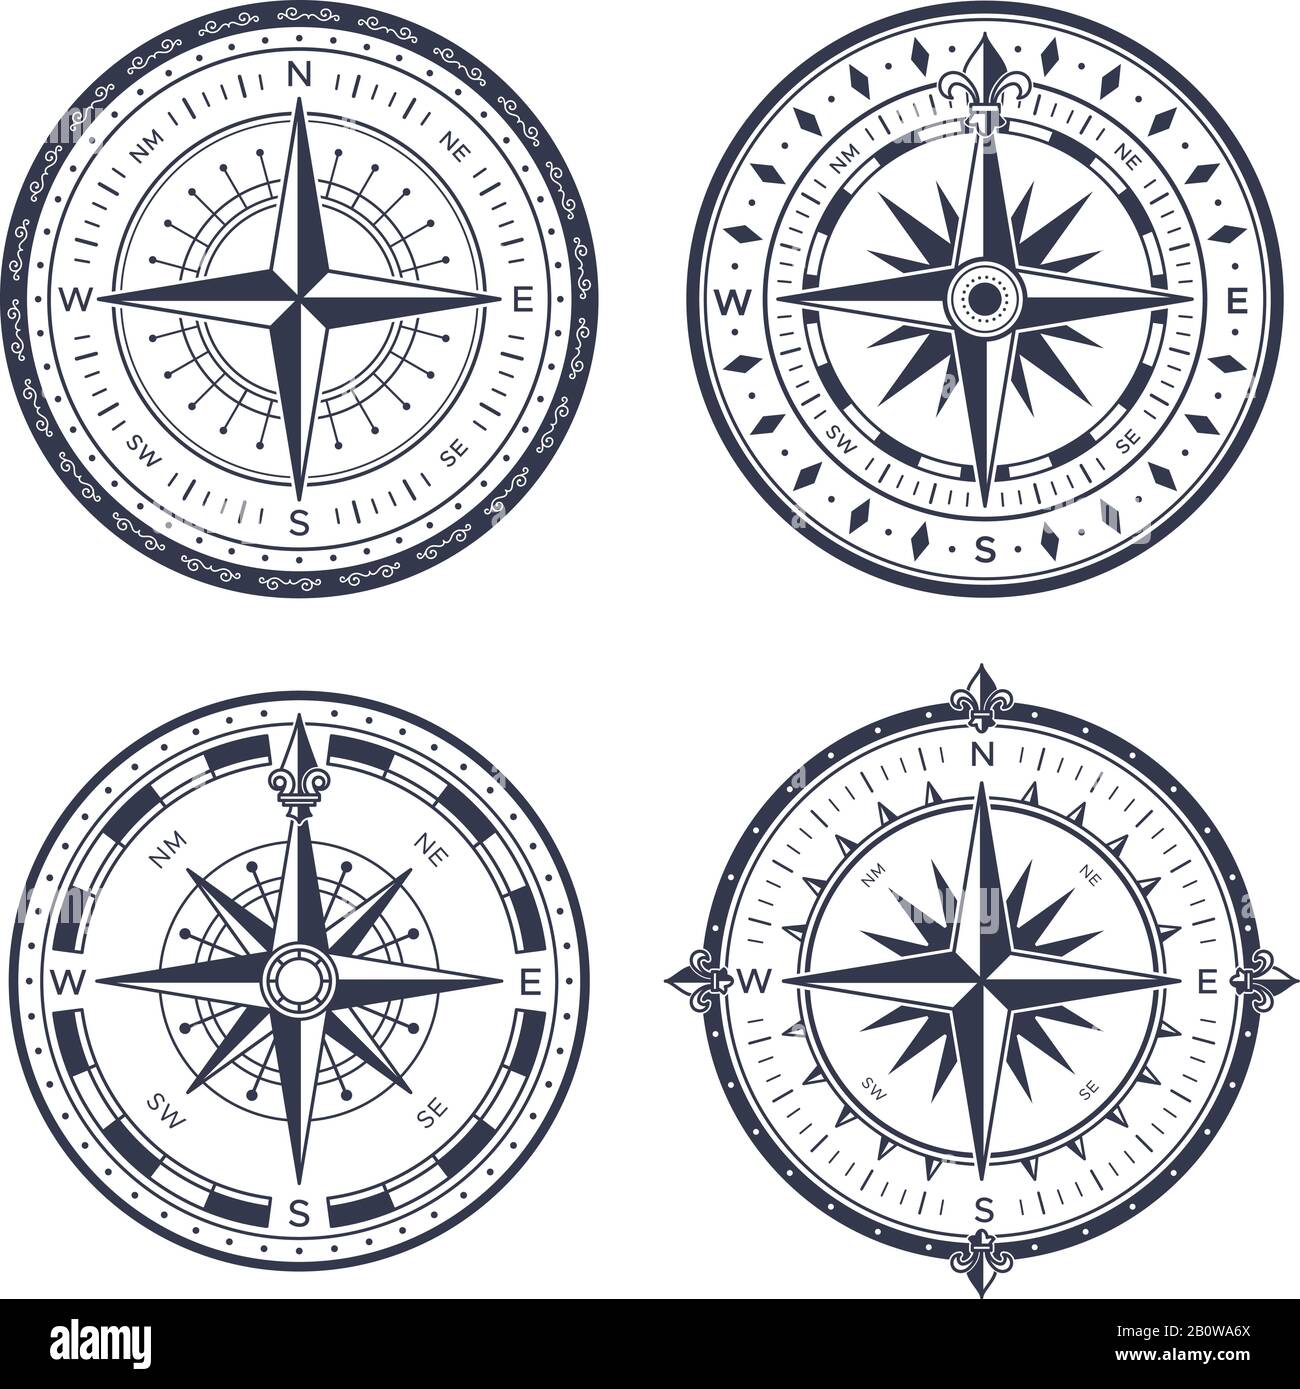 Vintage sea compass. Retro east and west, north and south arrows. Navigation compasses with rose of wind isolated vector set Stock Vector